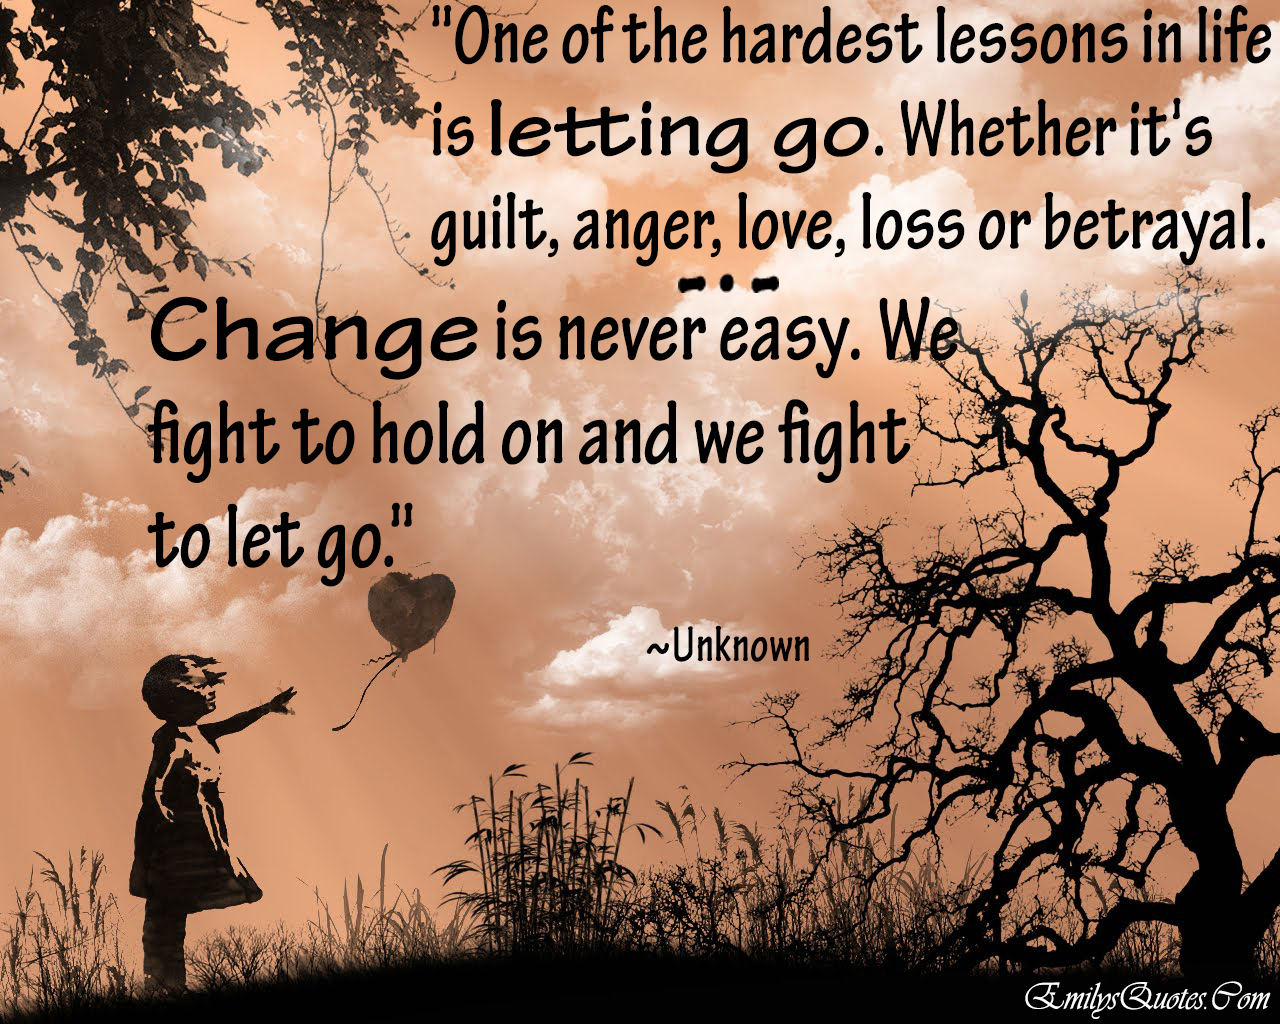 One of the hardest lessons in life is letting go. Whether it’s guilt, anger, love, loss or betrayal. Change is never easy. We fight to hold on and we fight to let go